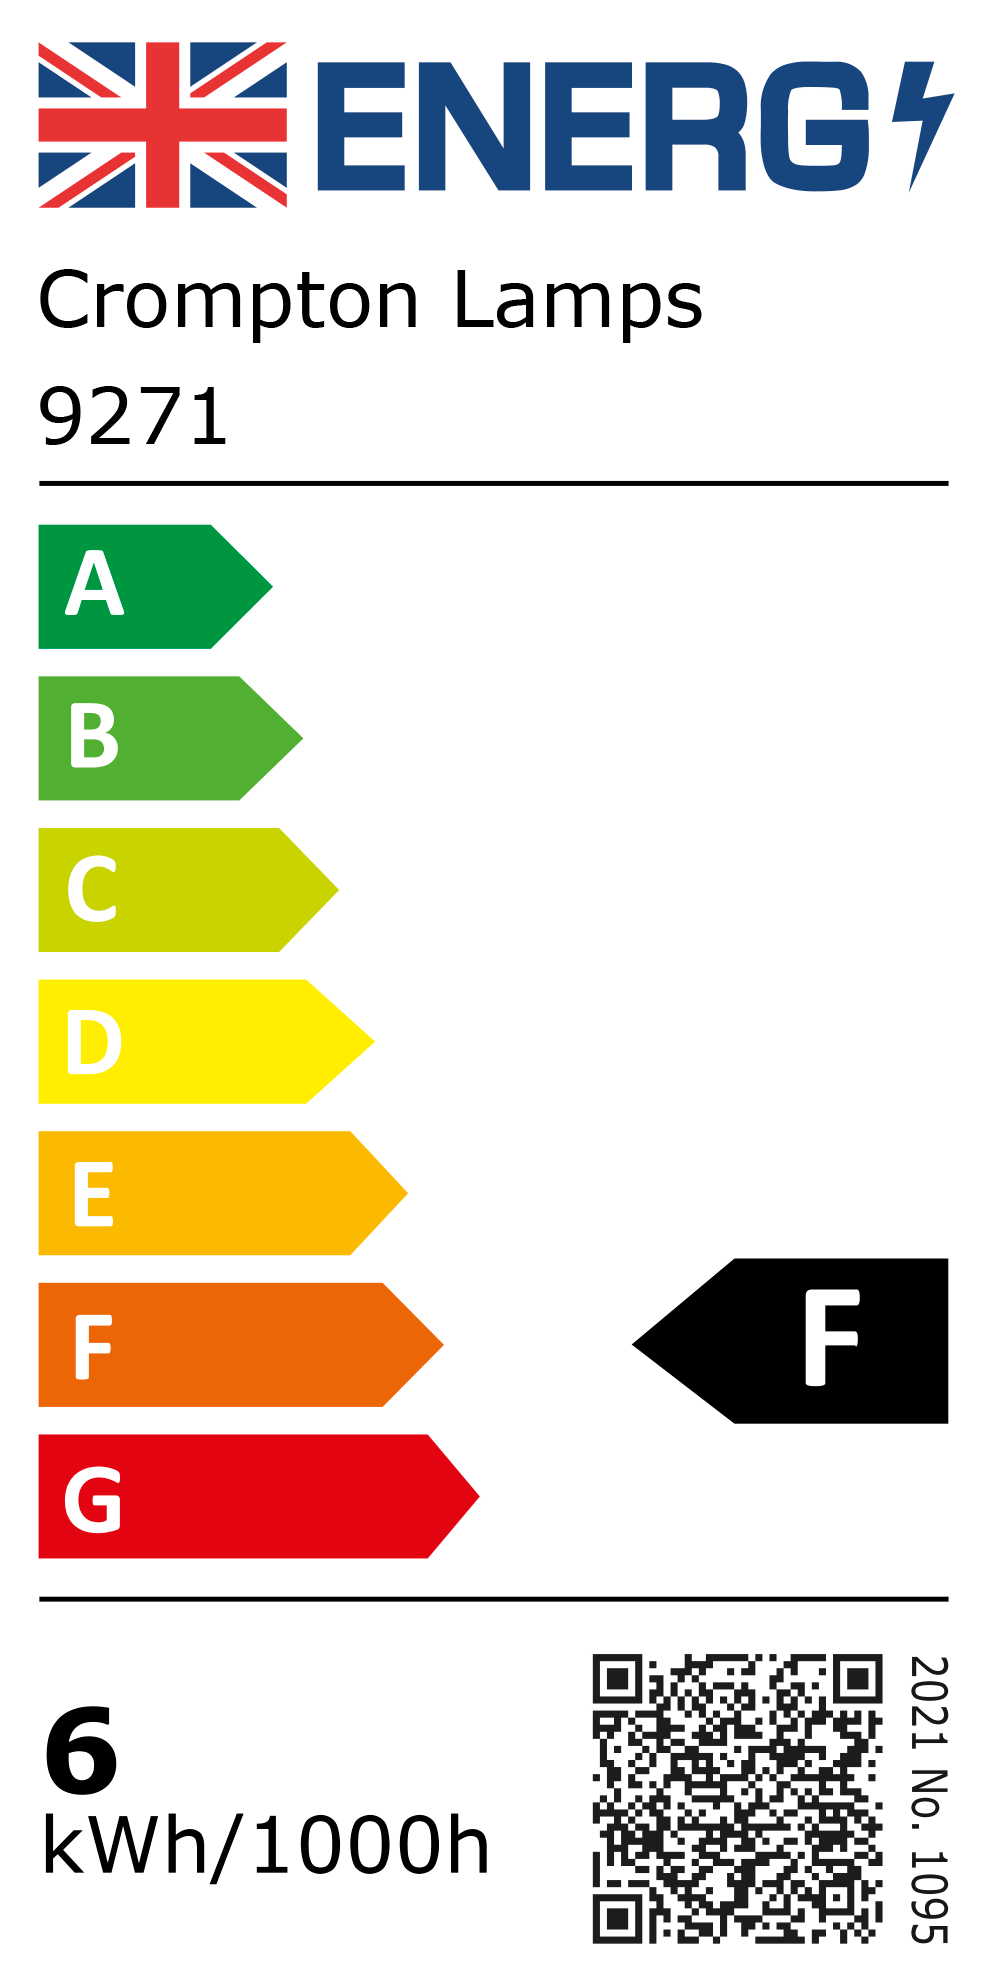 New 2021 Energy Rating Label: Stock Code 9271